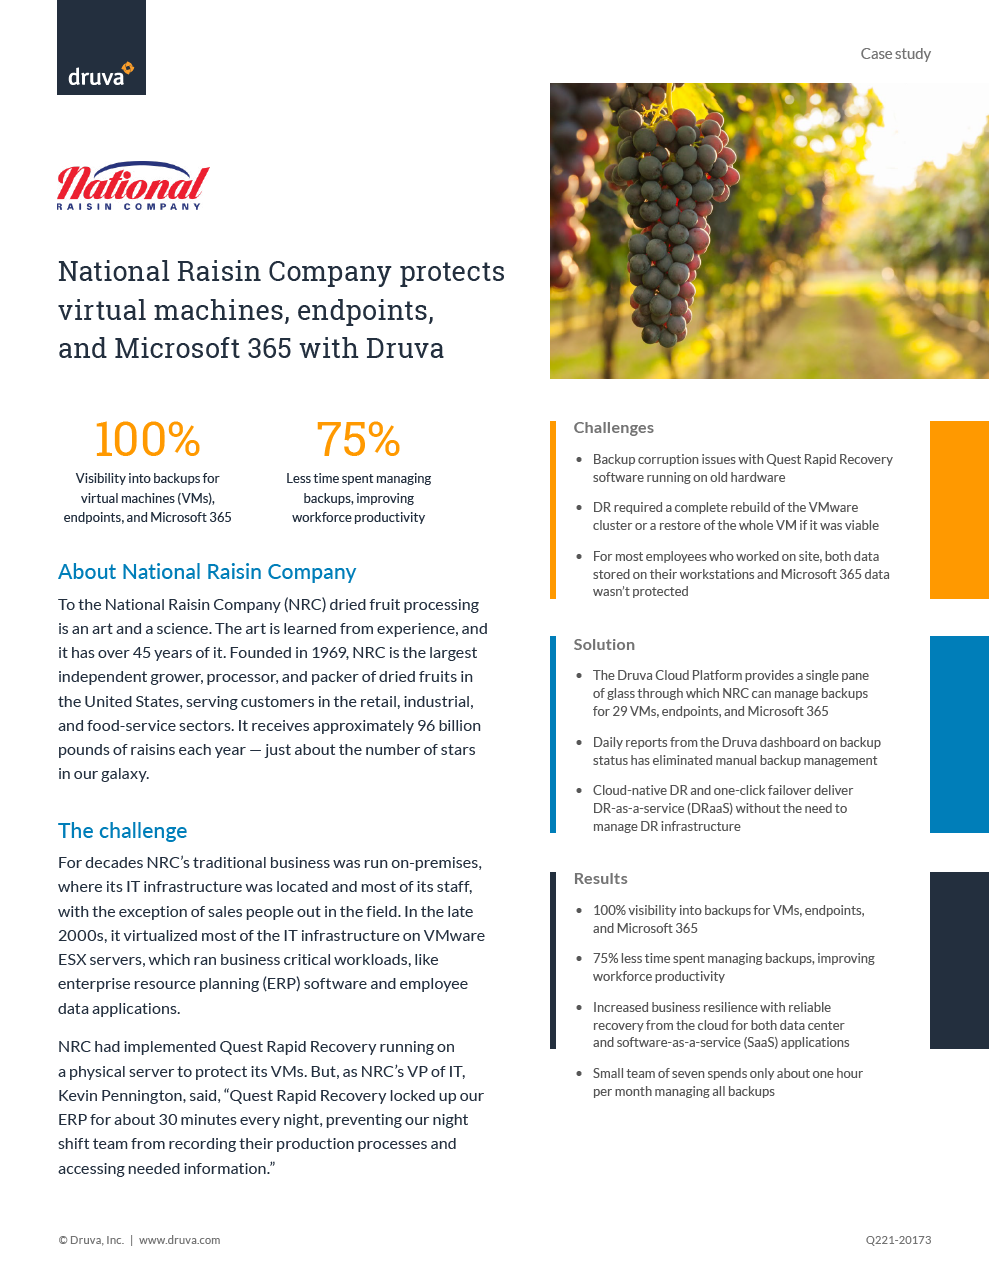 National Raisin Company protects virtual machines, endpoints, and Microsoft 365 with Druva